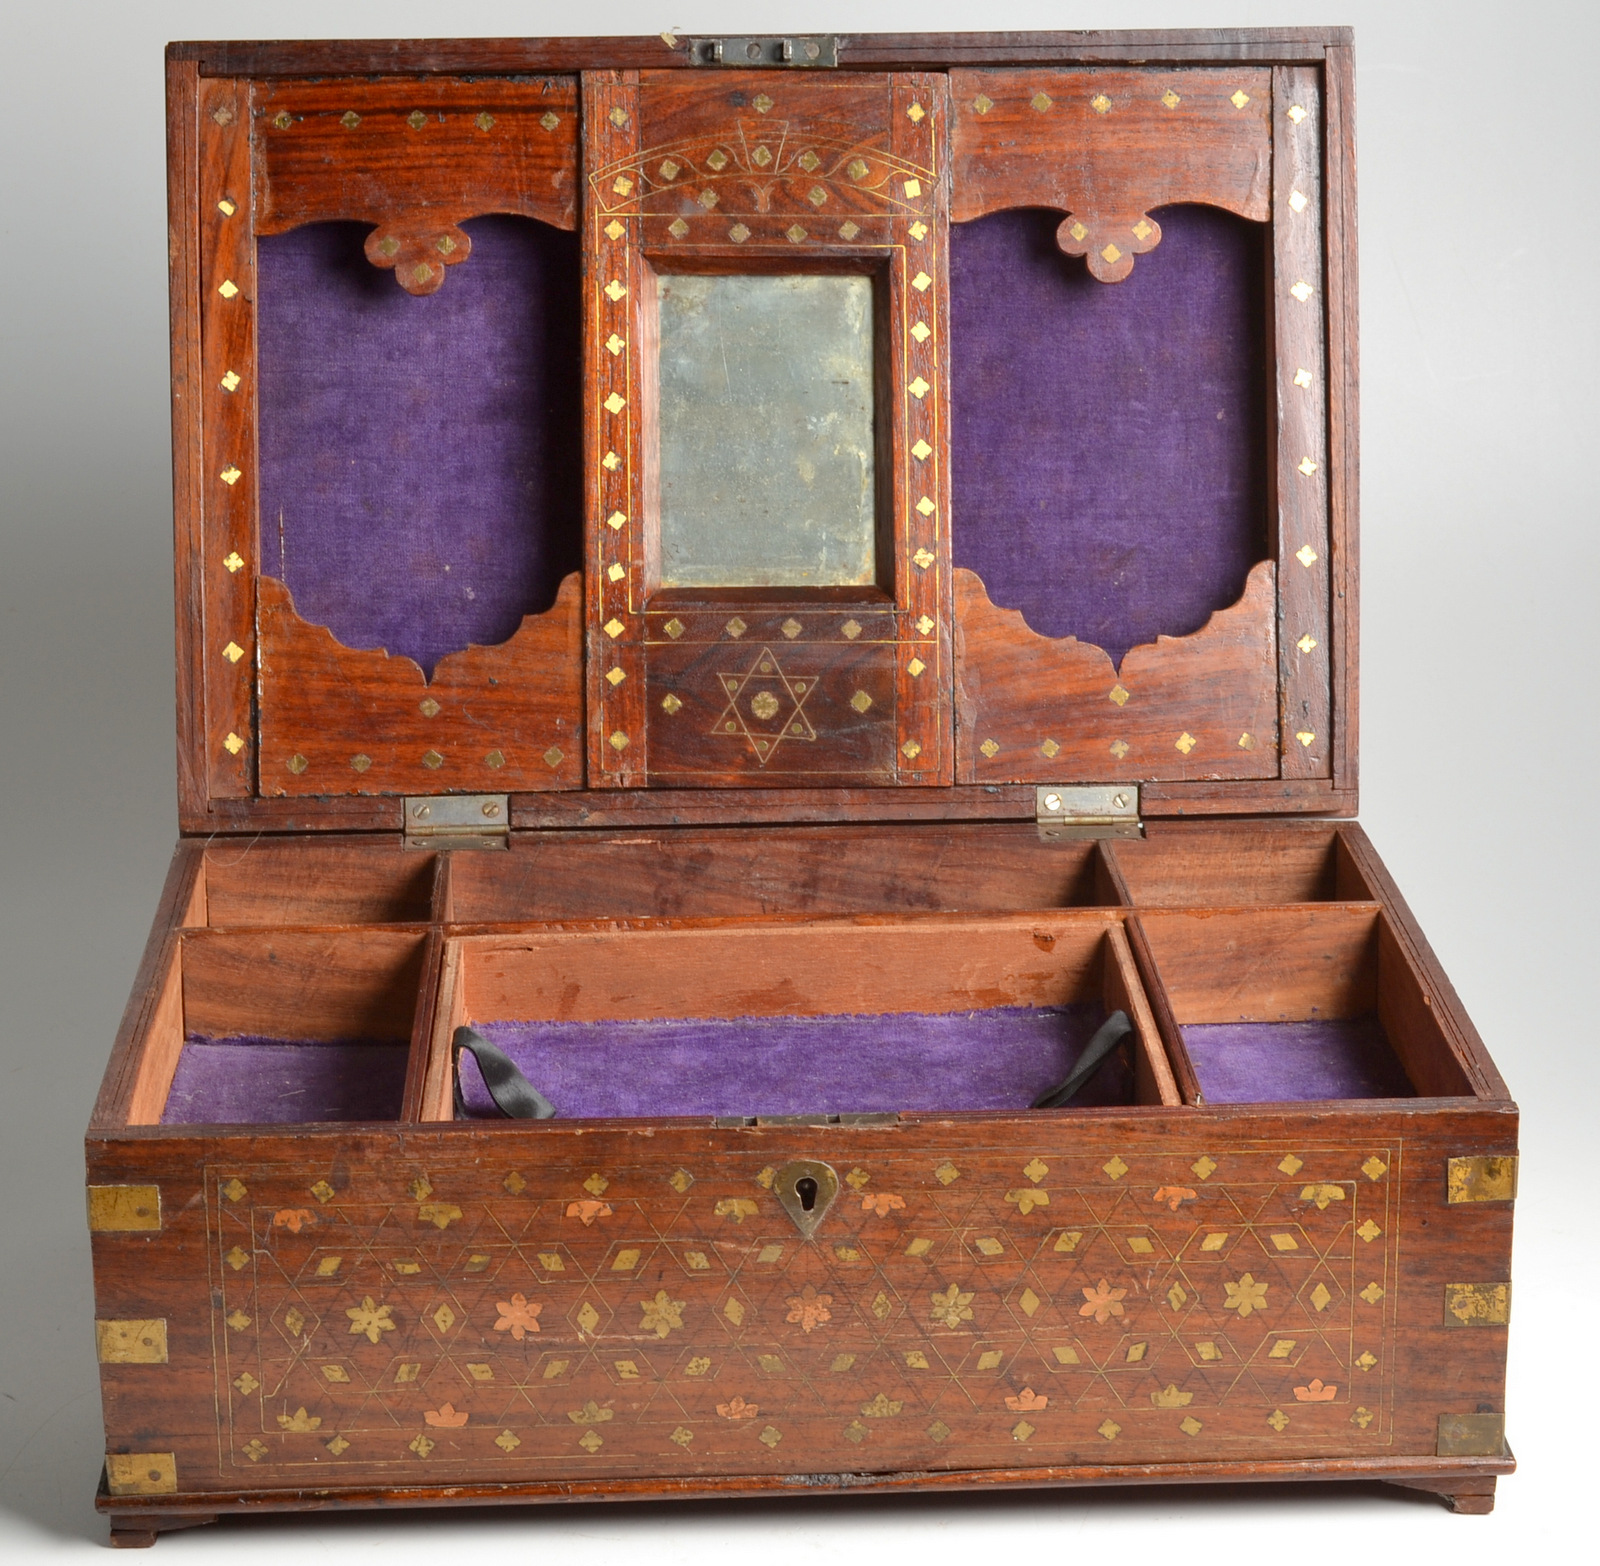 An Indian brass inlaid work box, circa 1900, decorated with floral motifs,